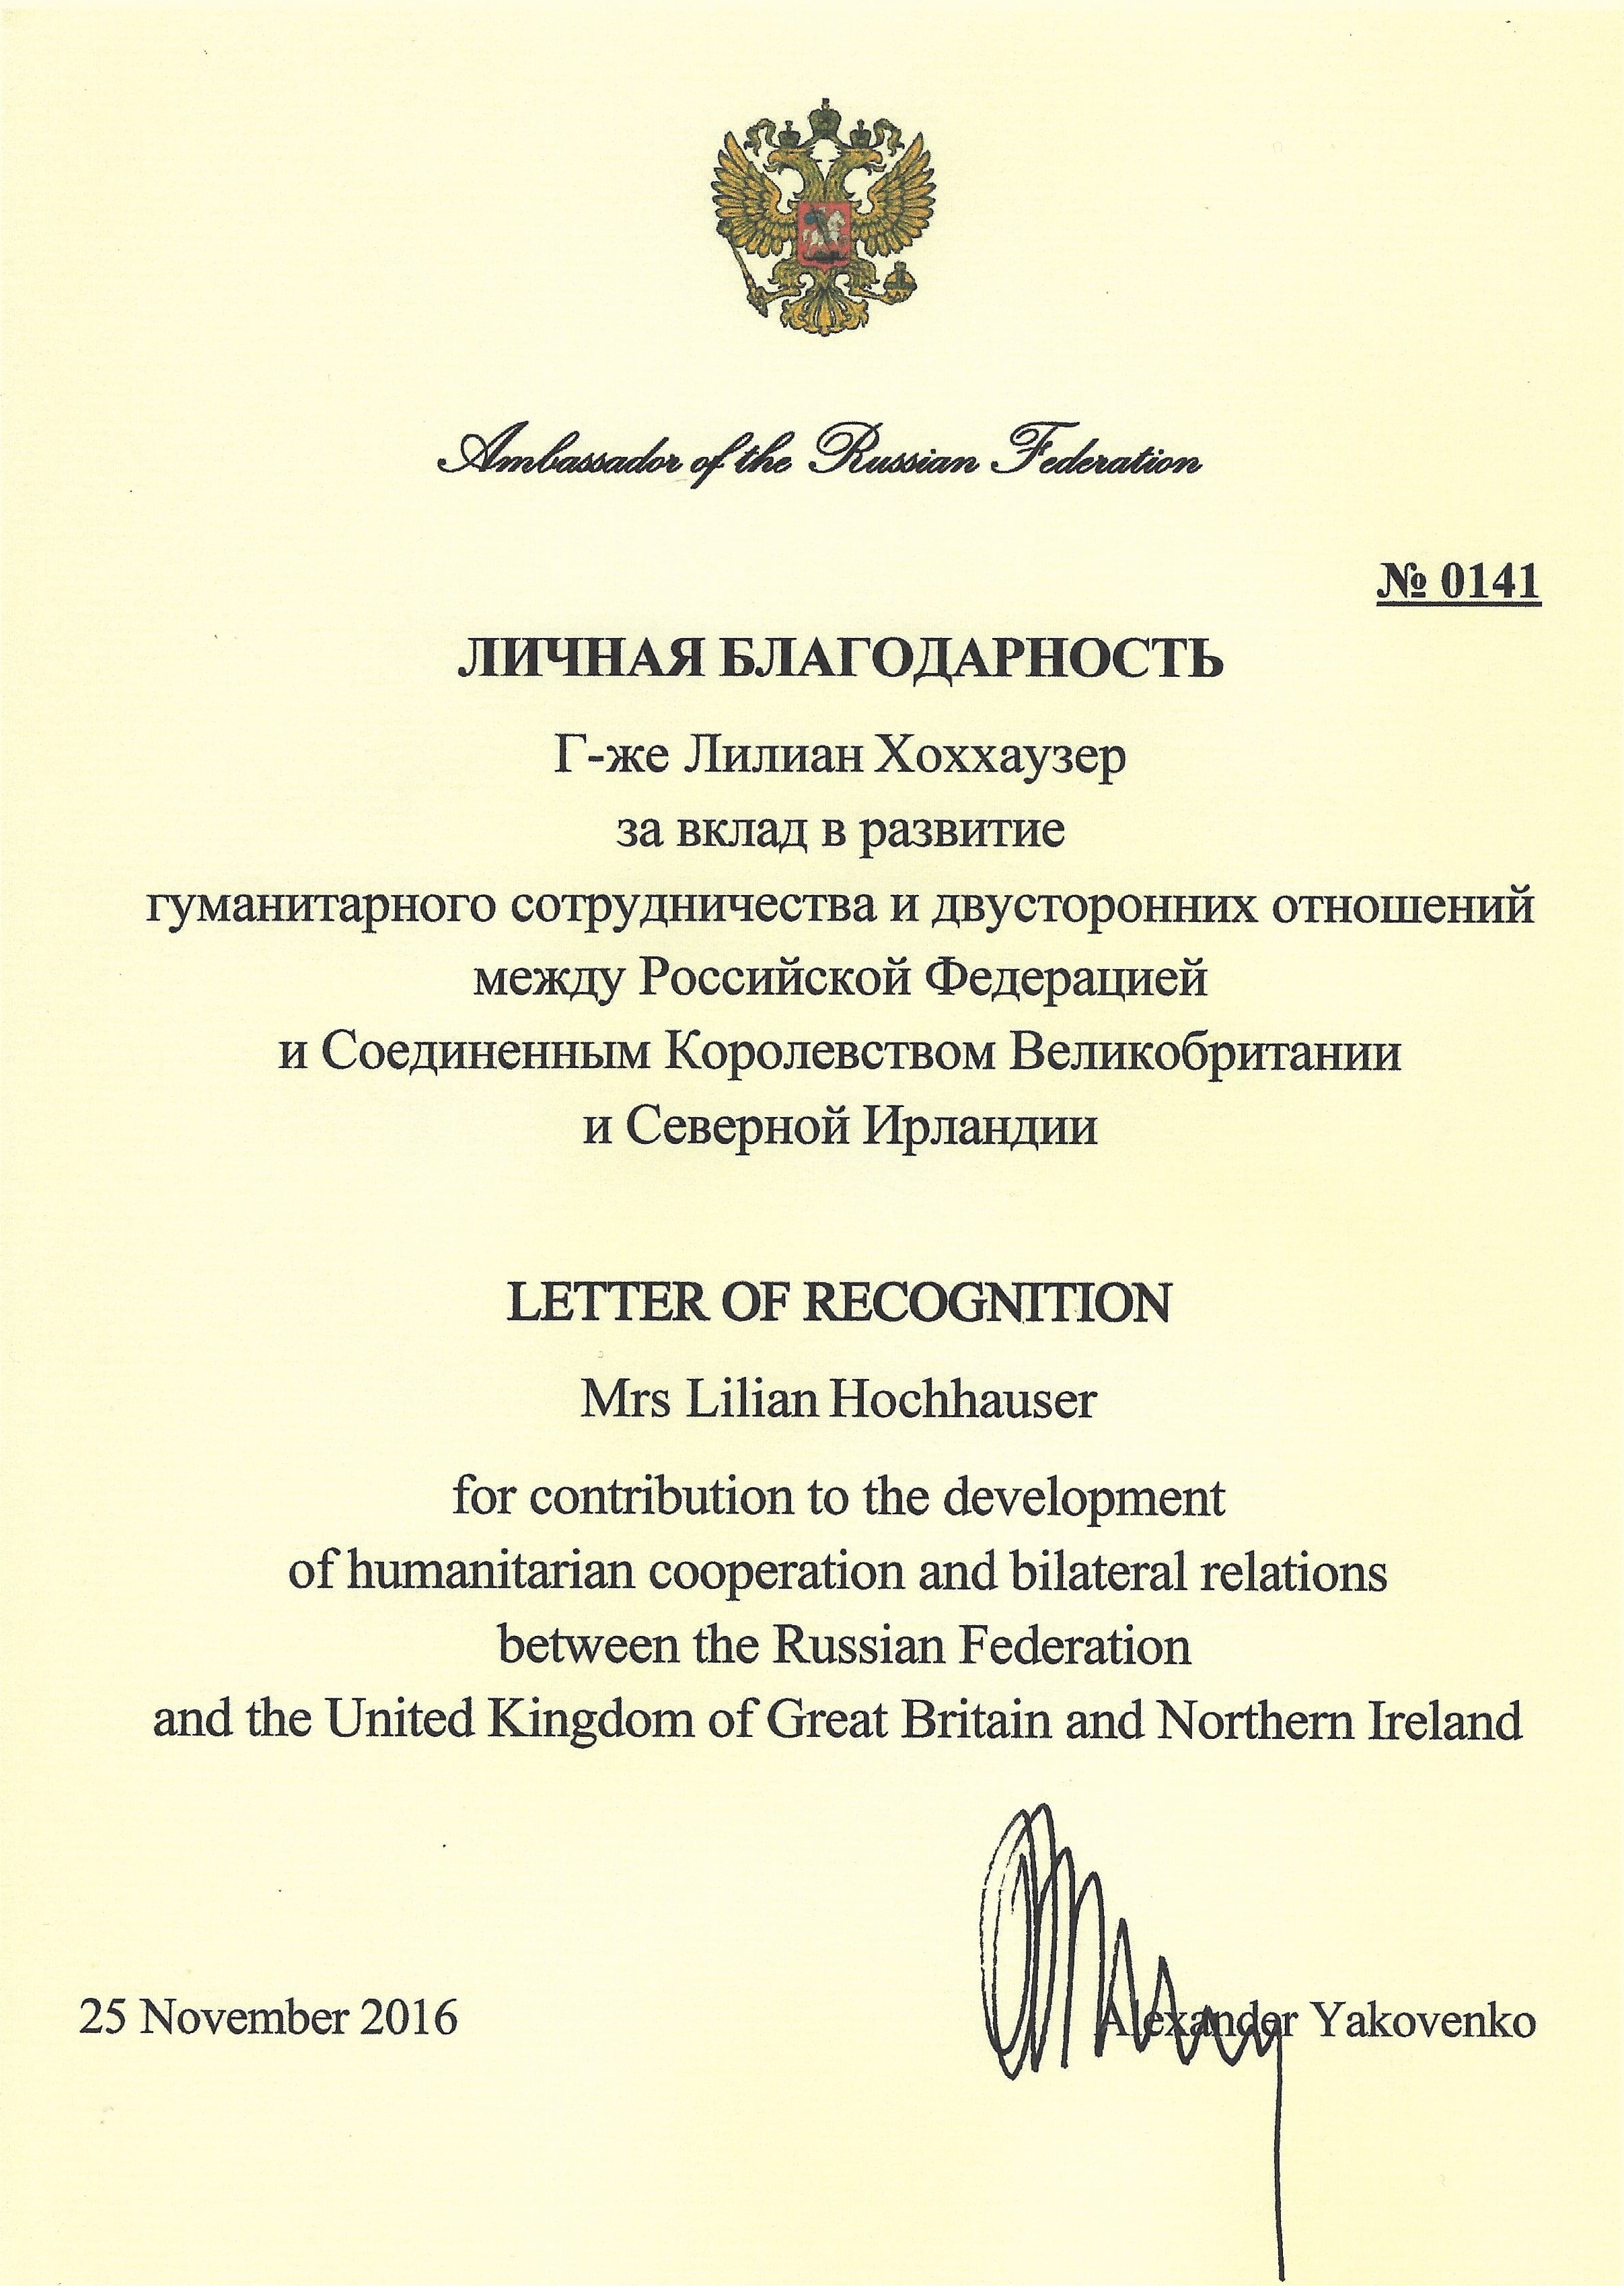 Russian Federation Letter of Recognition, Lilian Hochhauser